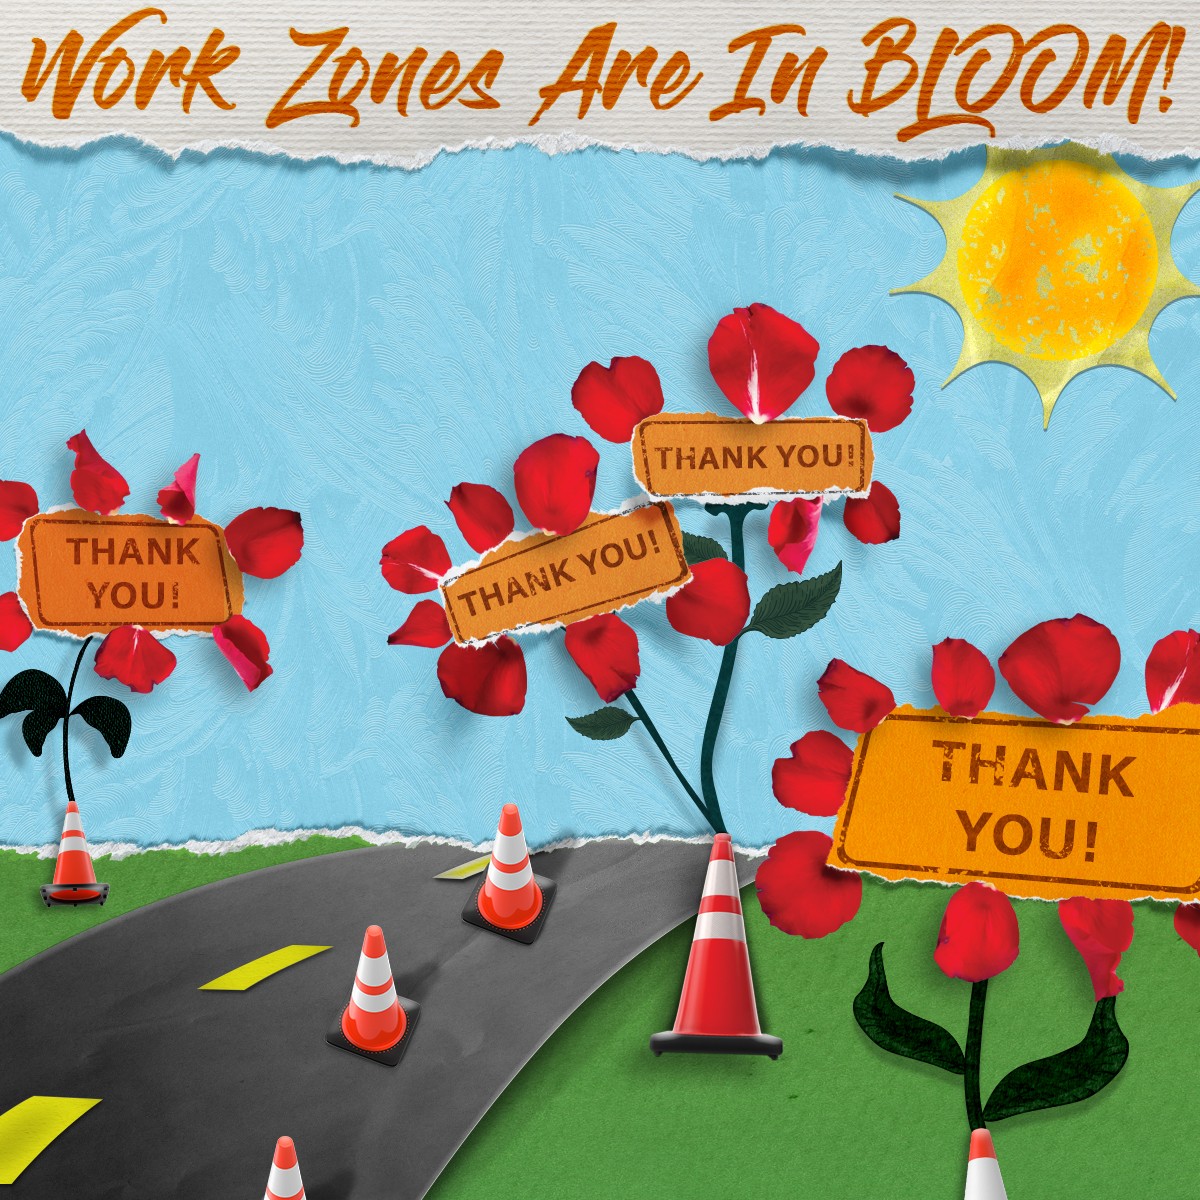 Work Zones Are In Bloom poster 